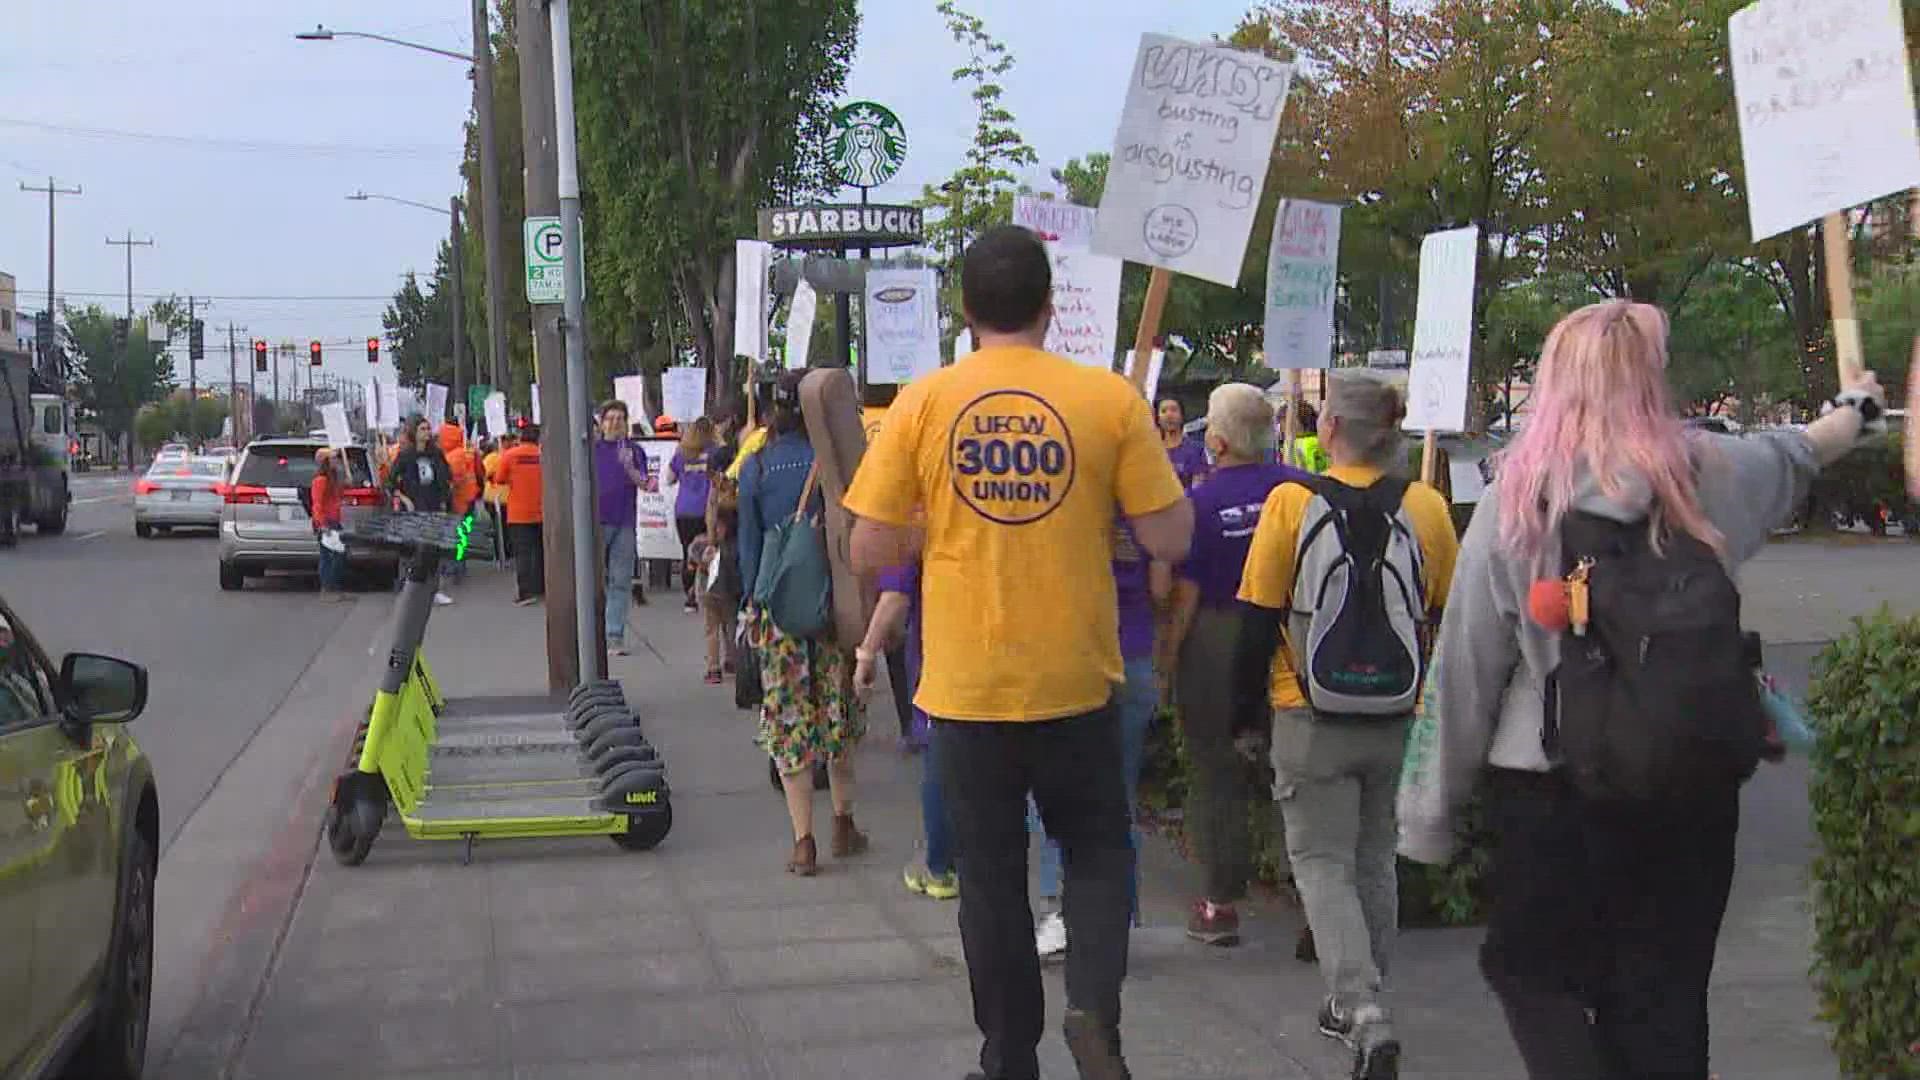 Hundreds of protesters gathered outside Starbucks headquarters in Seattle Tuesday morning demanding employees be invited to the company’s "Investor Day” event.